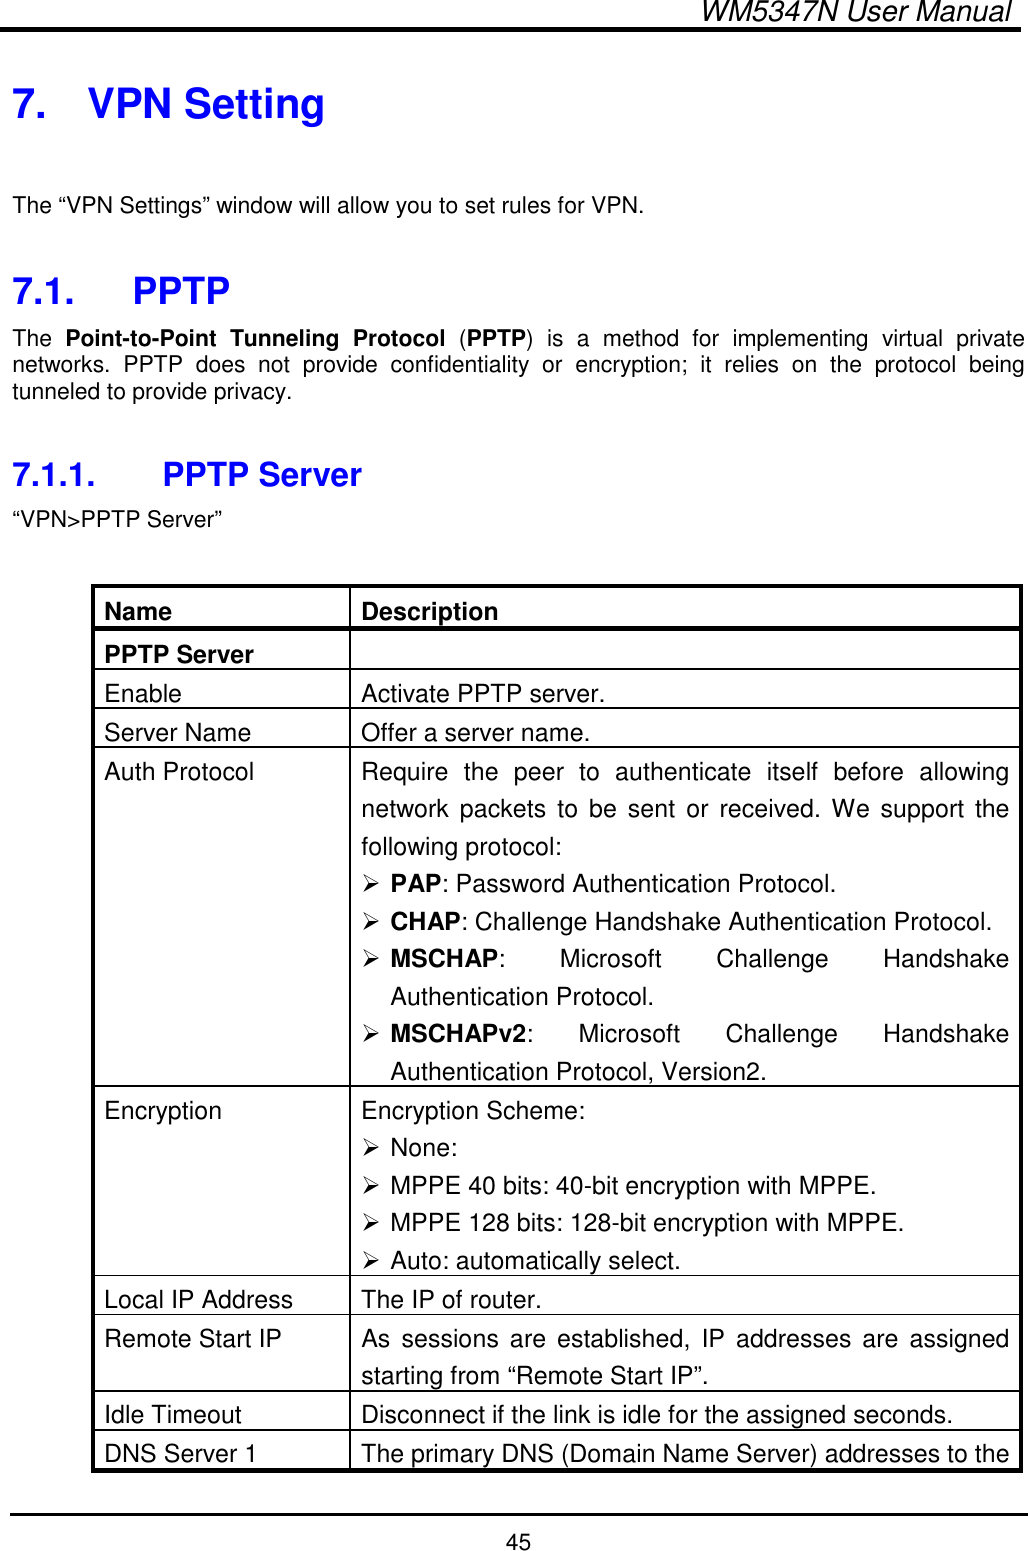  WM5347N User Manual  45 7.  VPN Setting  The “VPN Settings” window will allow you to set rules for VPN.  7.1.  PPTP The  Point-to-Point  Tunneling  Protocol  (PPTP)  is  a  method  for  implementing  virtual  private networks.  PPTP  does  not  provide  confidentiality  or  encryption;  it  relies  on  the  protocol  being tunneled to provide privacy.  7.1.1.  PPTP Server “VPN&gt;PPTP Server”  Name  Description PPTP Server   Enable  Activate PPTP server. Server Name  Offer a server name. Auth Protocol  Require  the  peer  to  authenticate  itself  before  allowing network  packets  to  be  sent  or  received. We support  the following protocol:  PAP: Password Authentication Protocol.  CHAP: Challenge Handshake Authentication Protocol.  MSCHAP:  Microsoft  Challenge  Handshake Authentication Protocol.  MSCHAPv2:  Microsoft  Challenge  Handshake Authentication Protocol, Version2. Encryption  Encryption Scheme:  None:  MPPE 40 bits: 40-bit encryption with MPPE.  MPPE 128 bits: 128-bit encryption with MPPE.  Auto: automatically select. Local IP Address  The IP of router. Remote Start IP  As  sessions  are  established,  IP  addresses  are  assigned starting from “Remote Start IP”. Idle Timeout  Disconnect if the link is idle for the assigned seconds. DNS Server 1  The primary DNS (Domain Name Server) addresses to the 